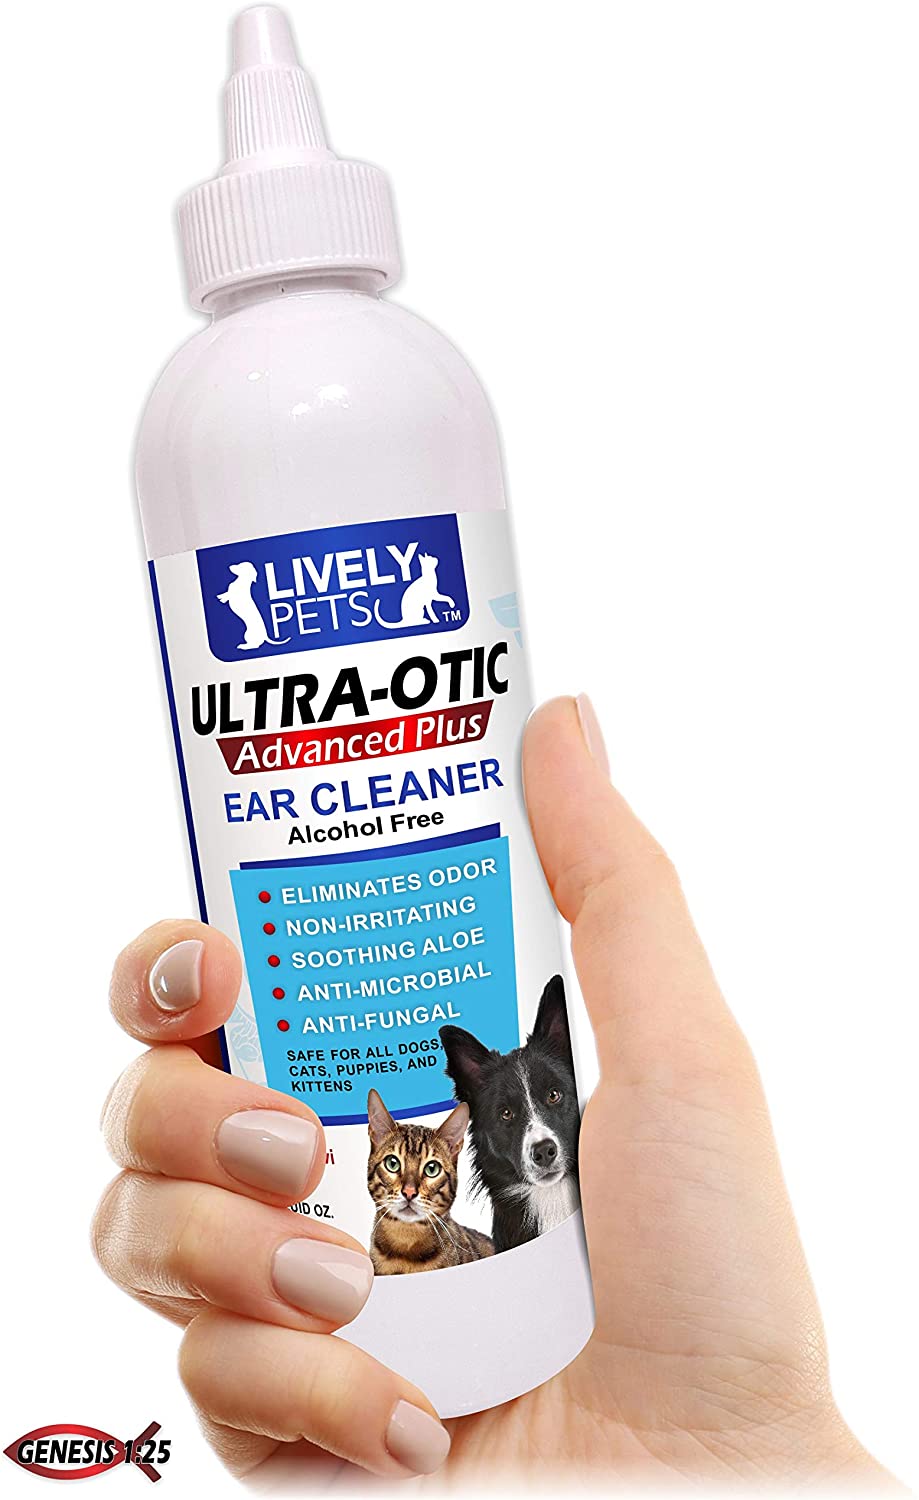 Lively Pets Dog Ear Cleaner and Ear Infection Treatment - Ear Mites, Yeast & Fungal Infections - Broad Spectrum Veterinary Formula